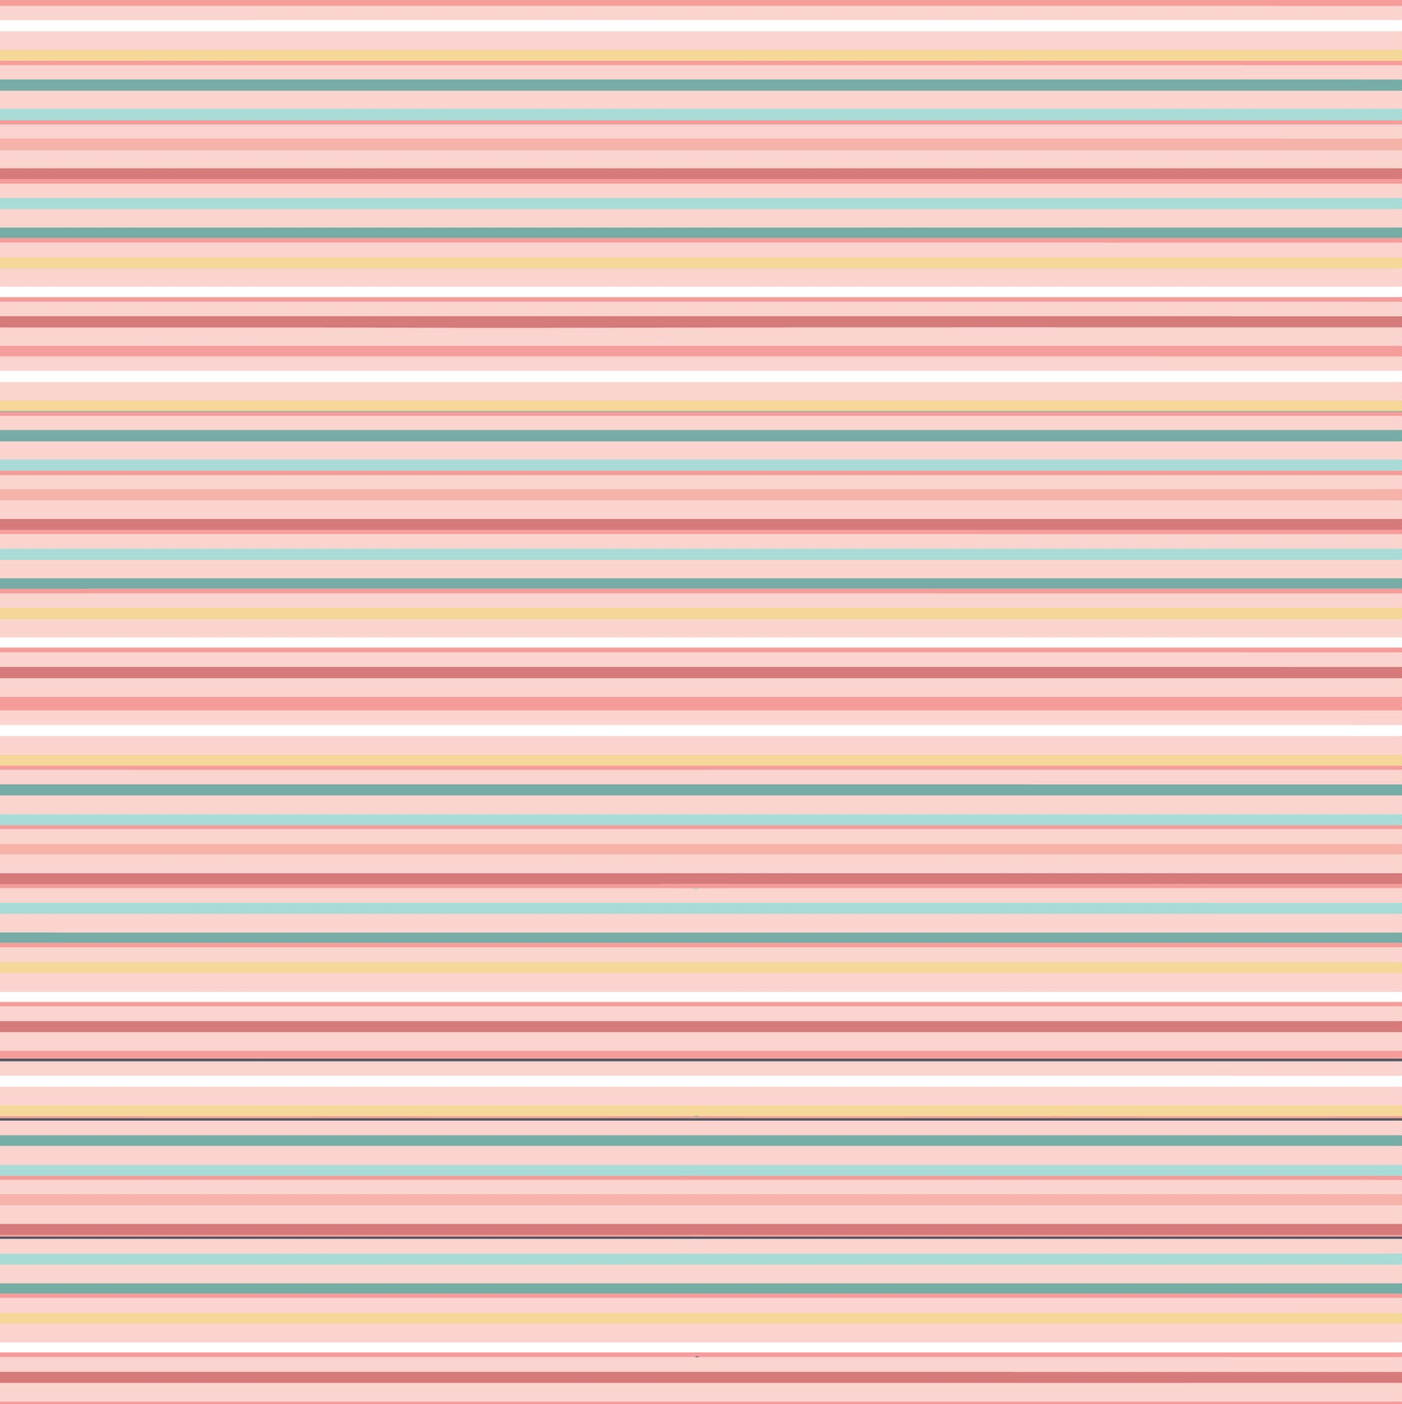 Painted Blossoms Picket Fence Pink PB24664, sold by the 1/2 yard, *PREORDER